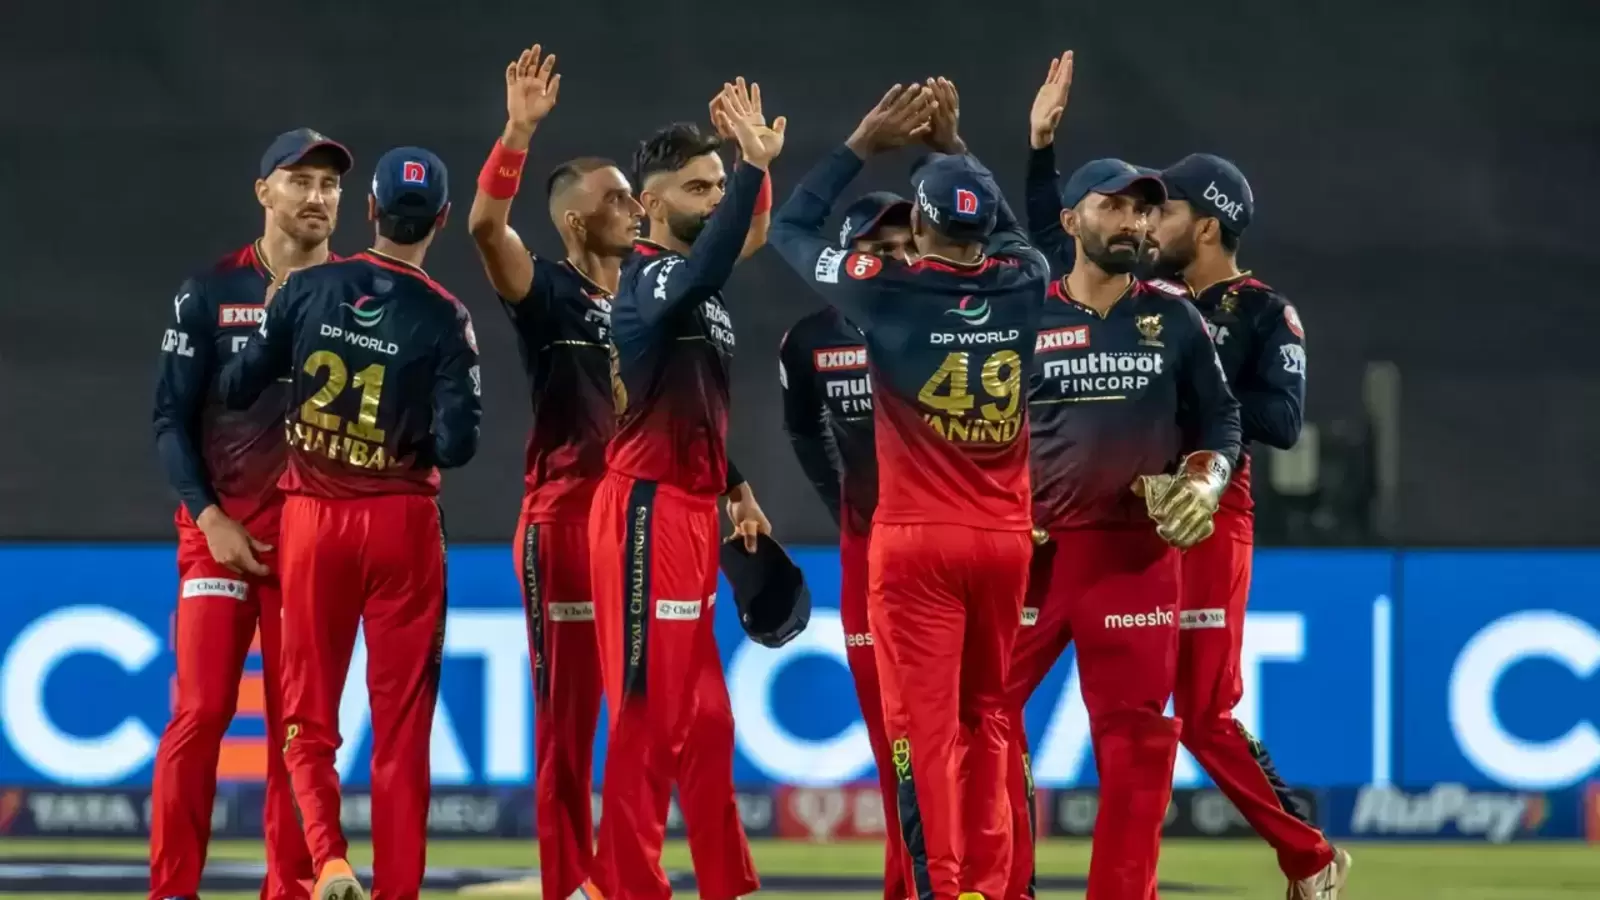 On 24th April 2019, de Villiers and Stoinis special keeps RCB alive